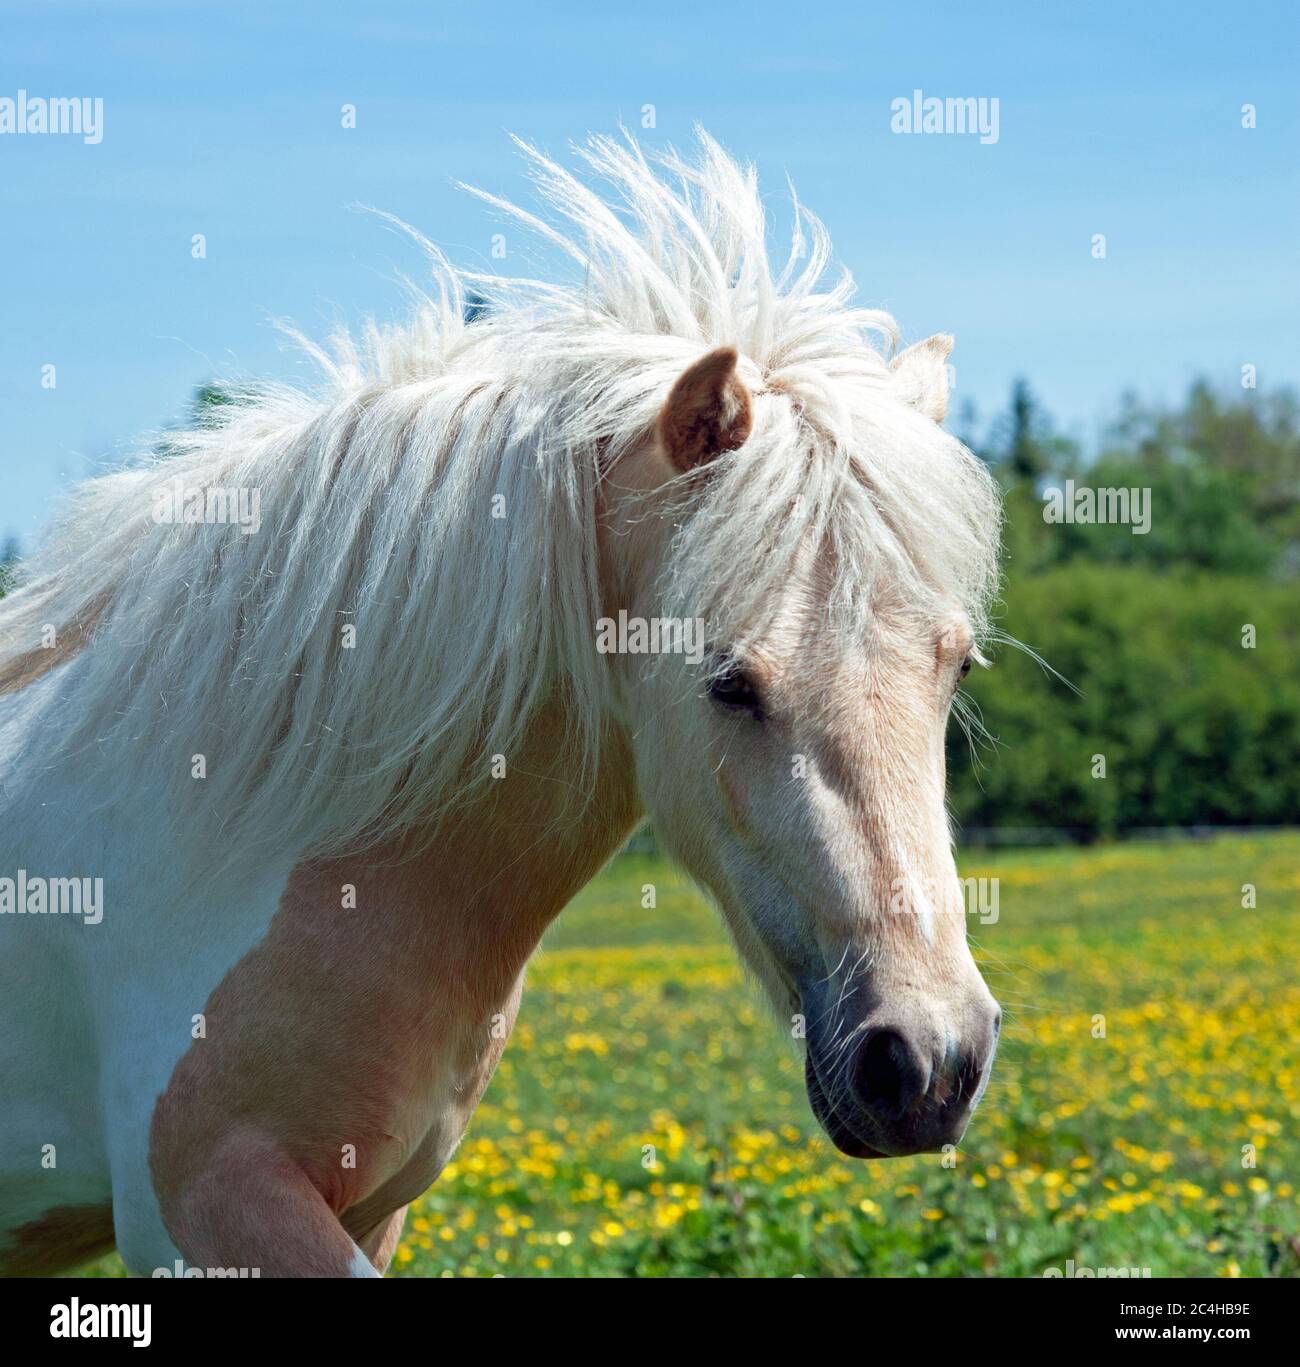 Horse on a field in the countryside, Ireland Stock Photo